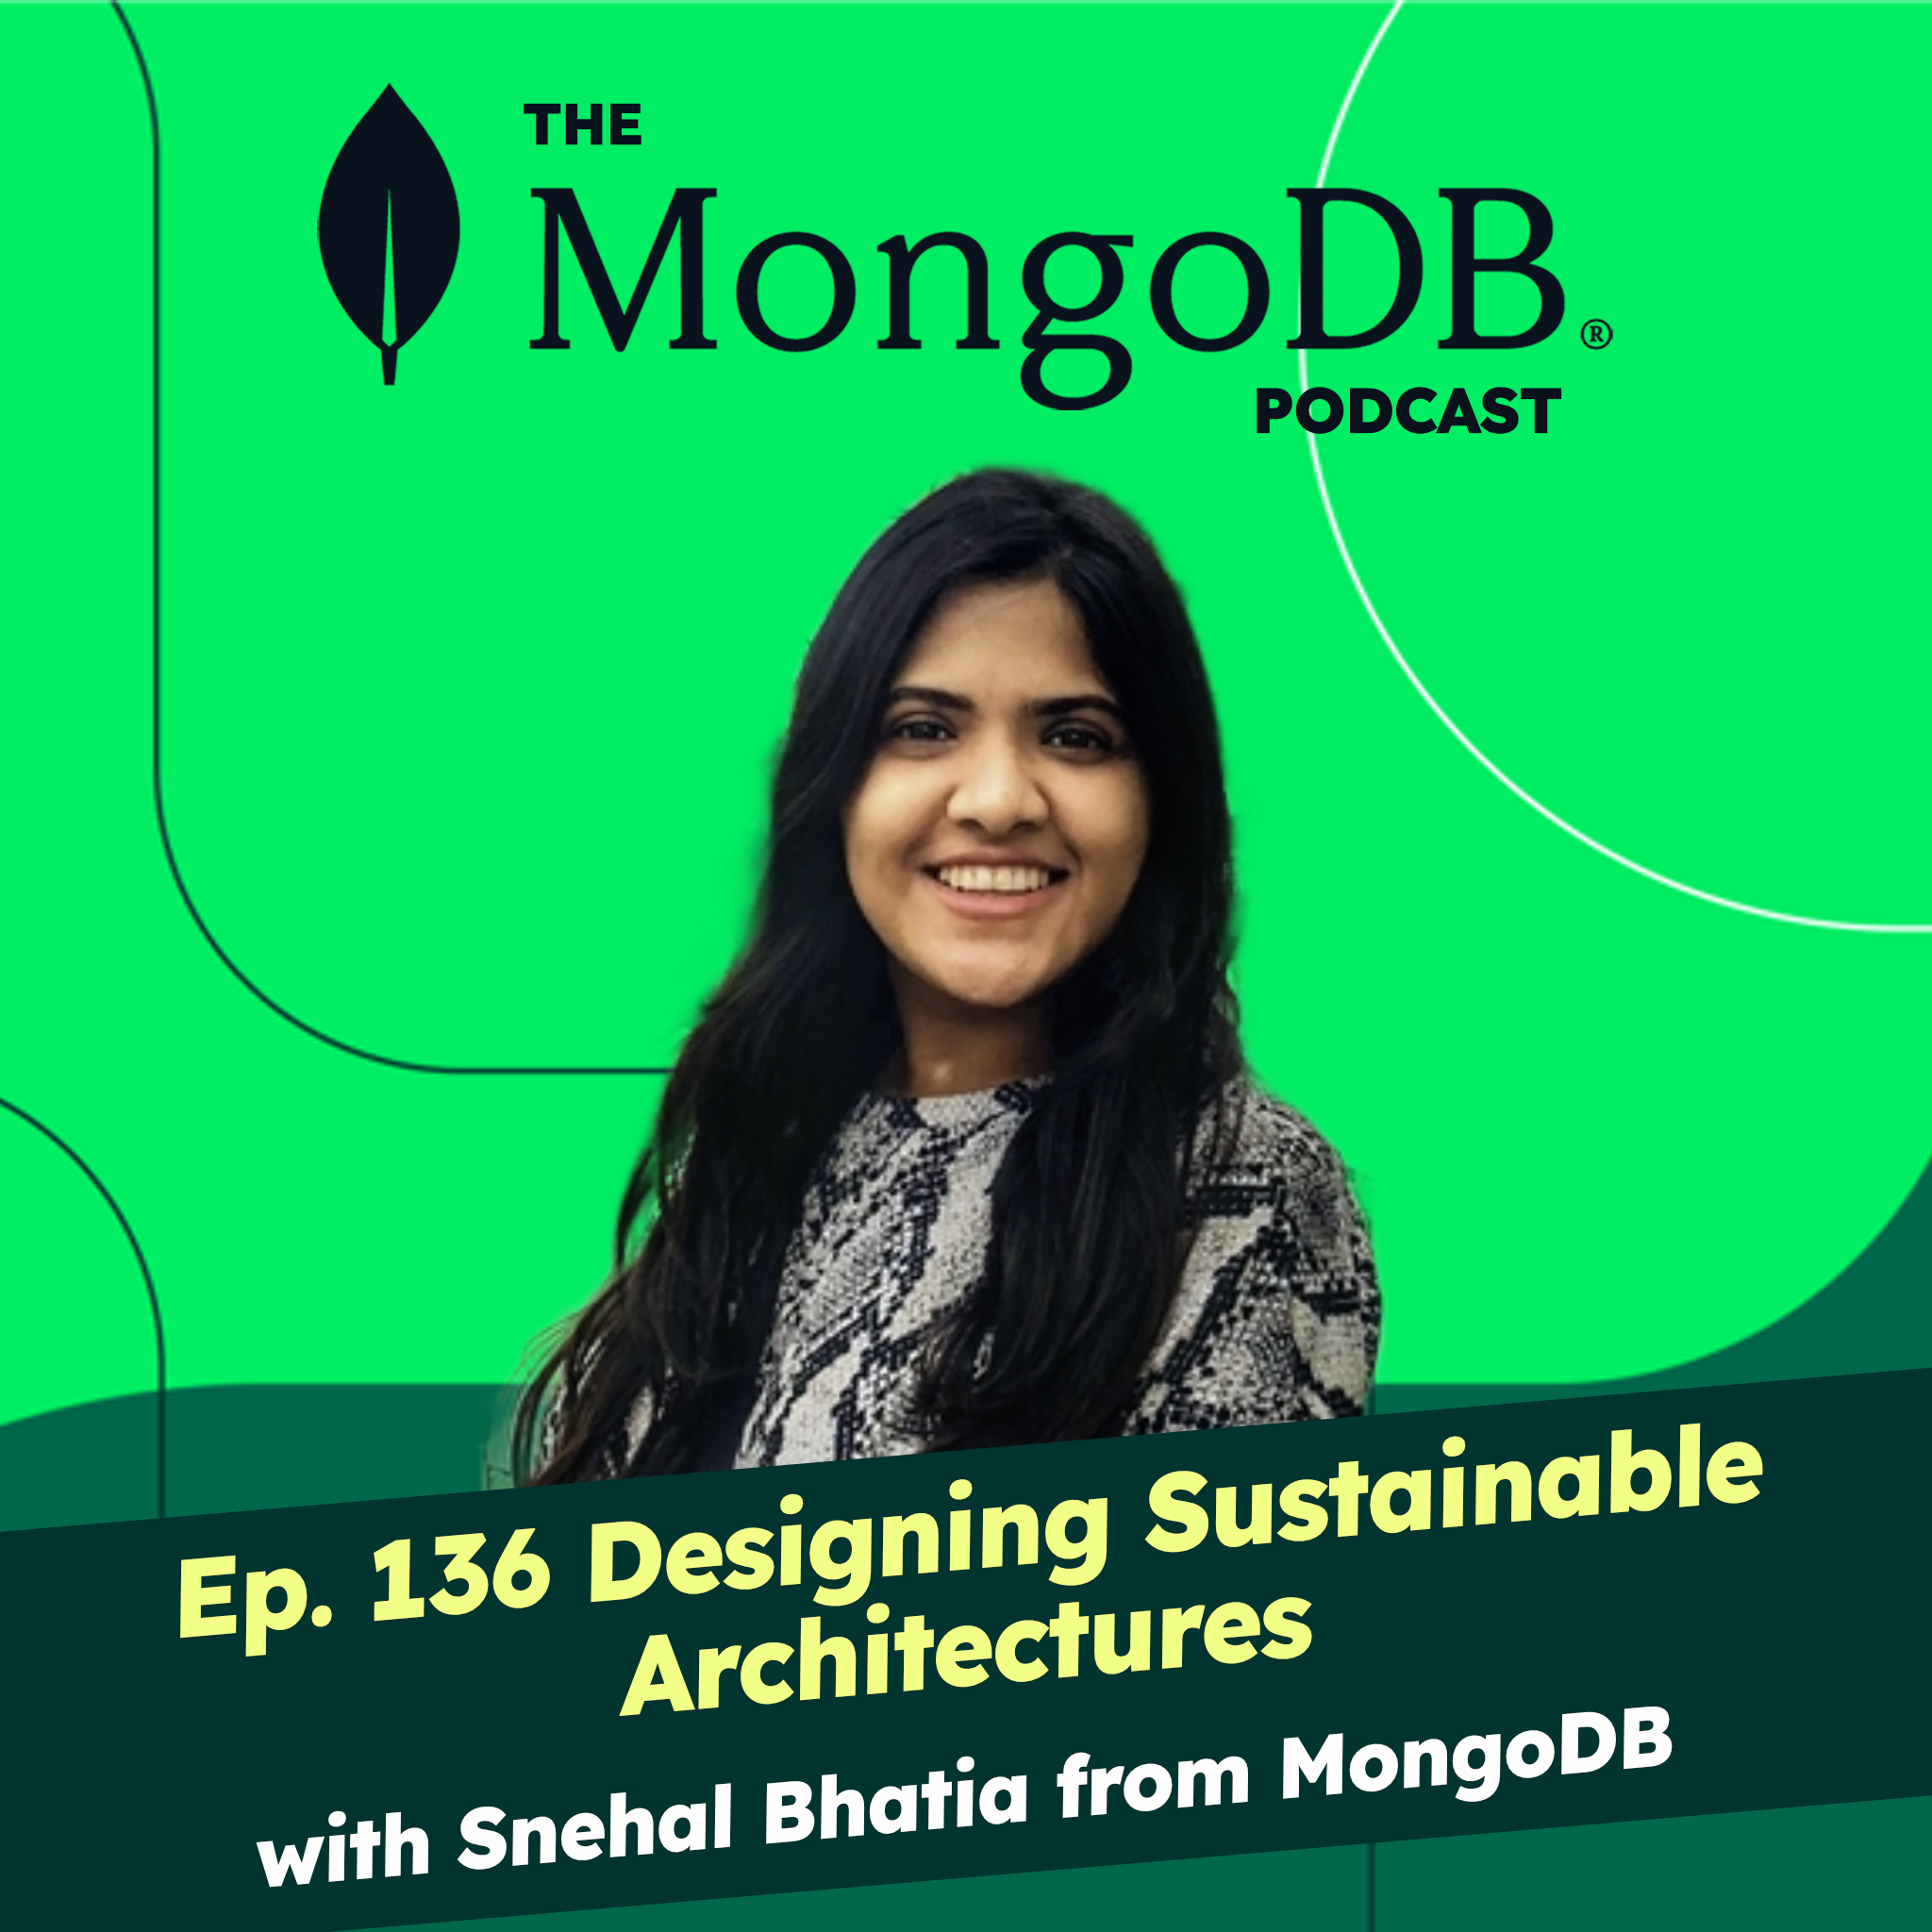 Ep 136 Designing Sustainable Architectures with Snehal Bhatia